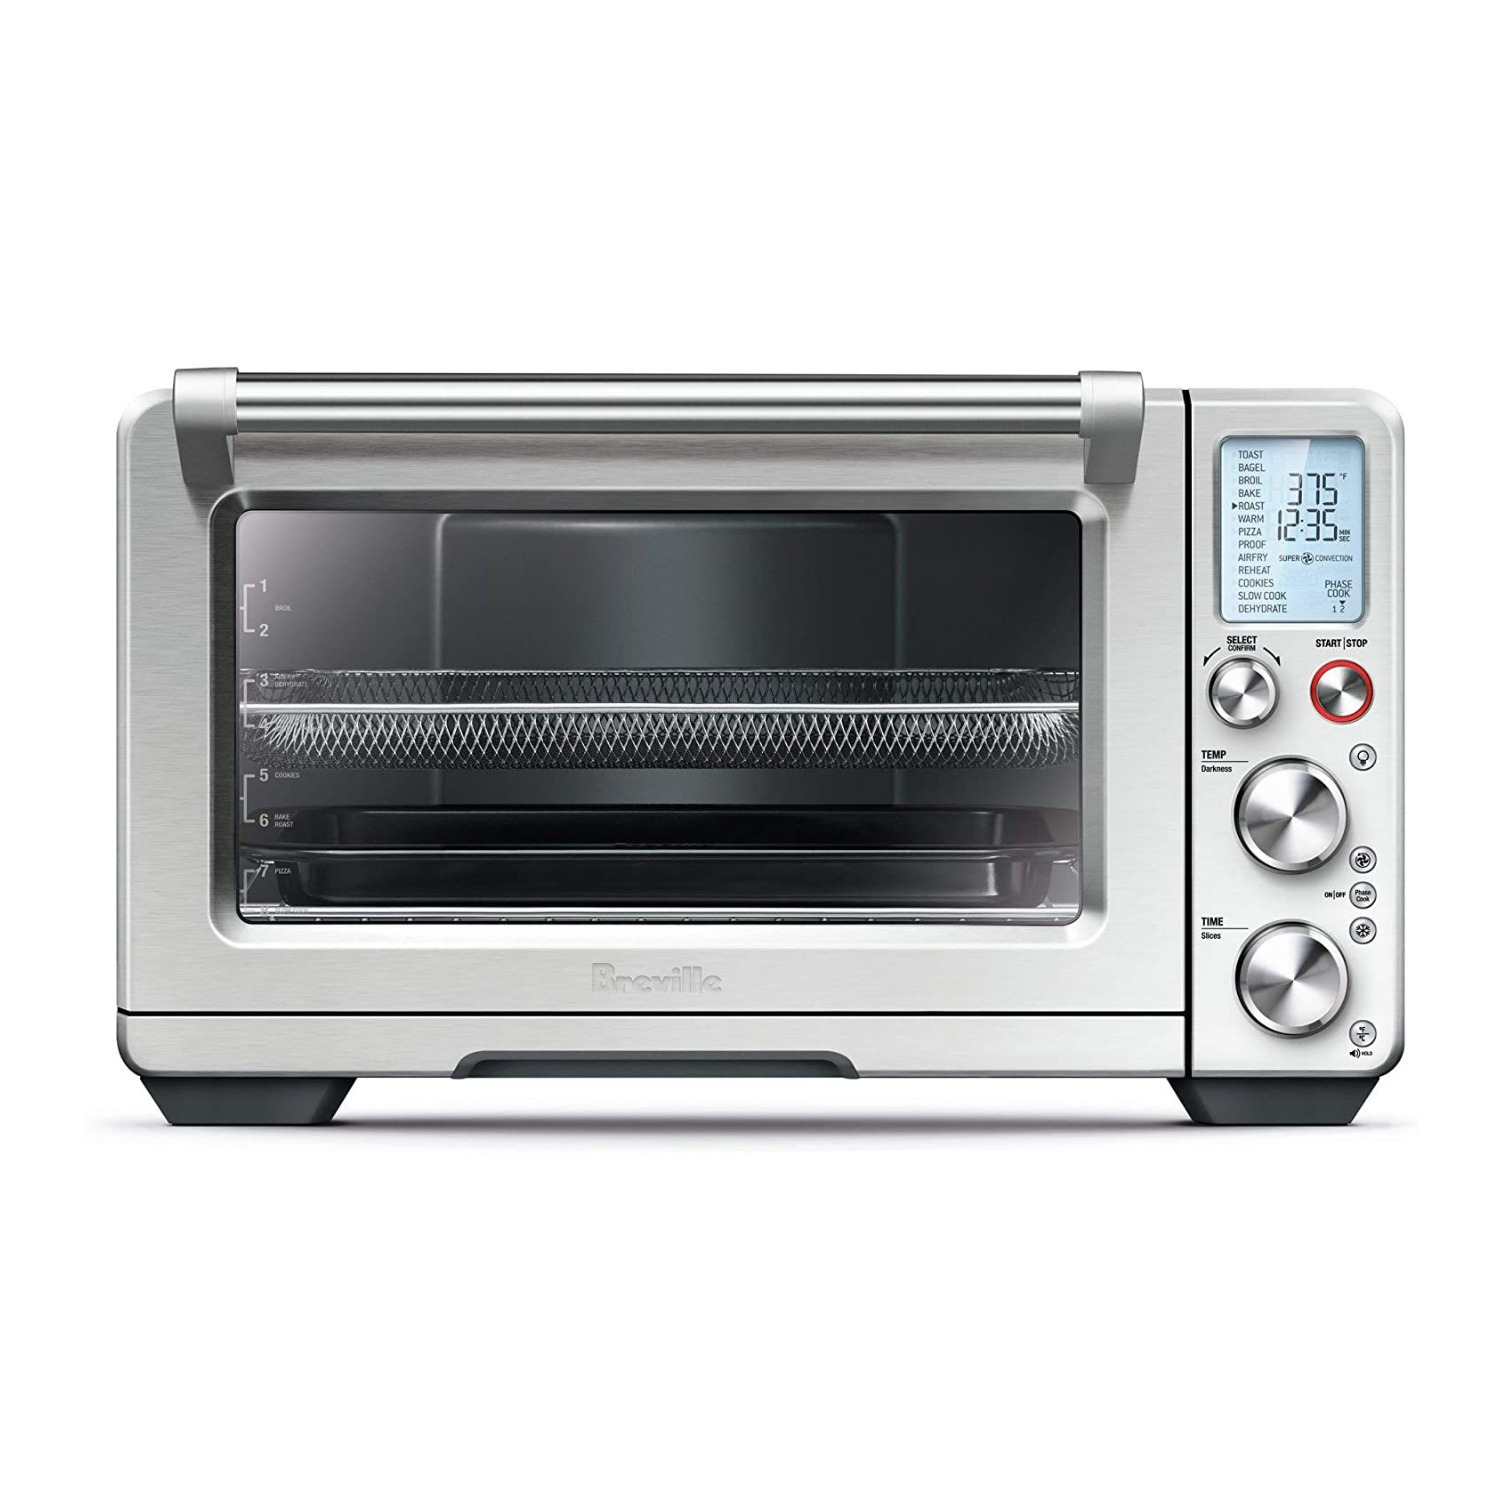 Breville BOV900BSS Convection and Air Fry Smart Oven Air - image 1 of 3